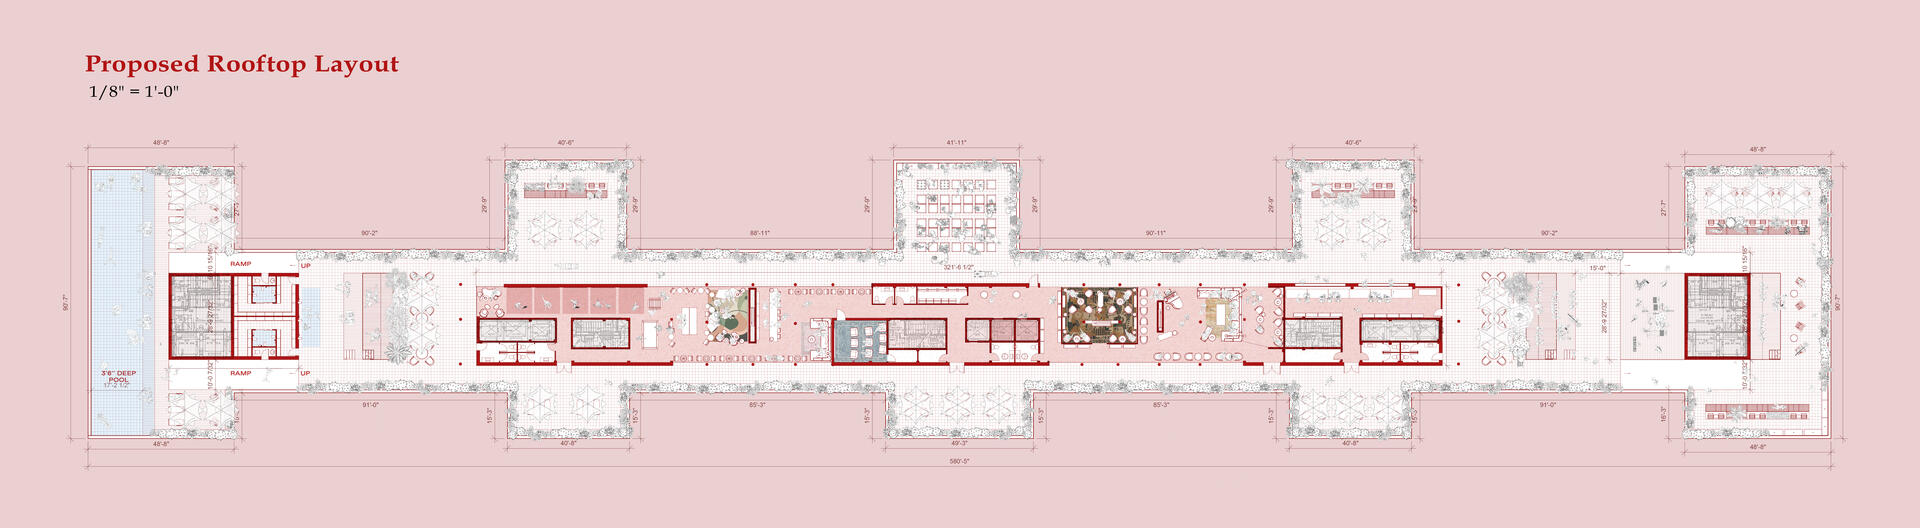 Proposed Rooftop Layout